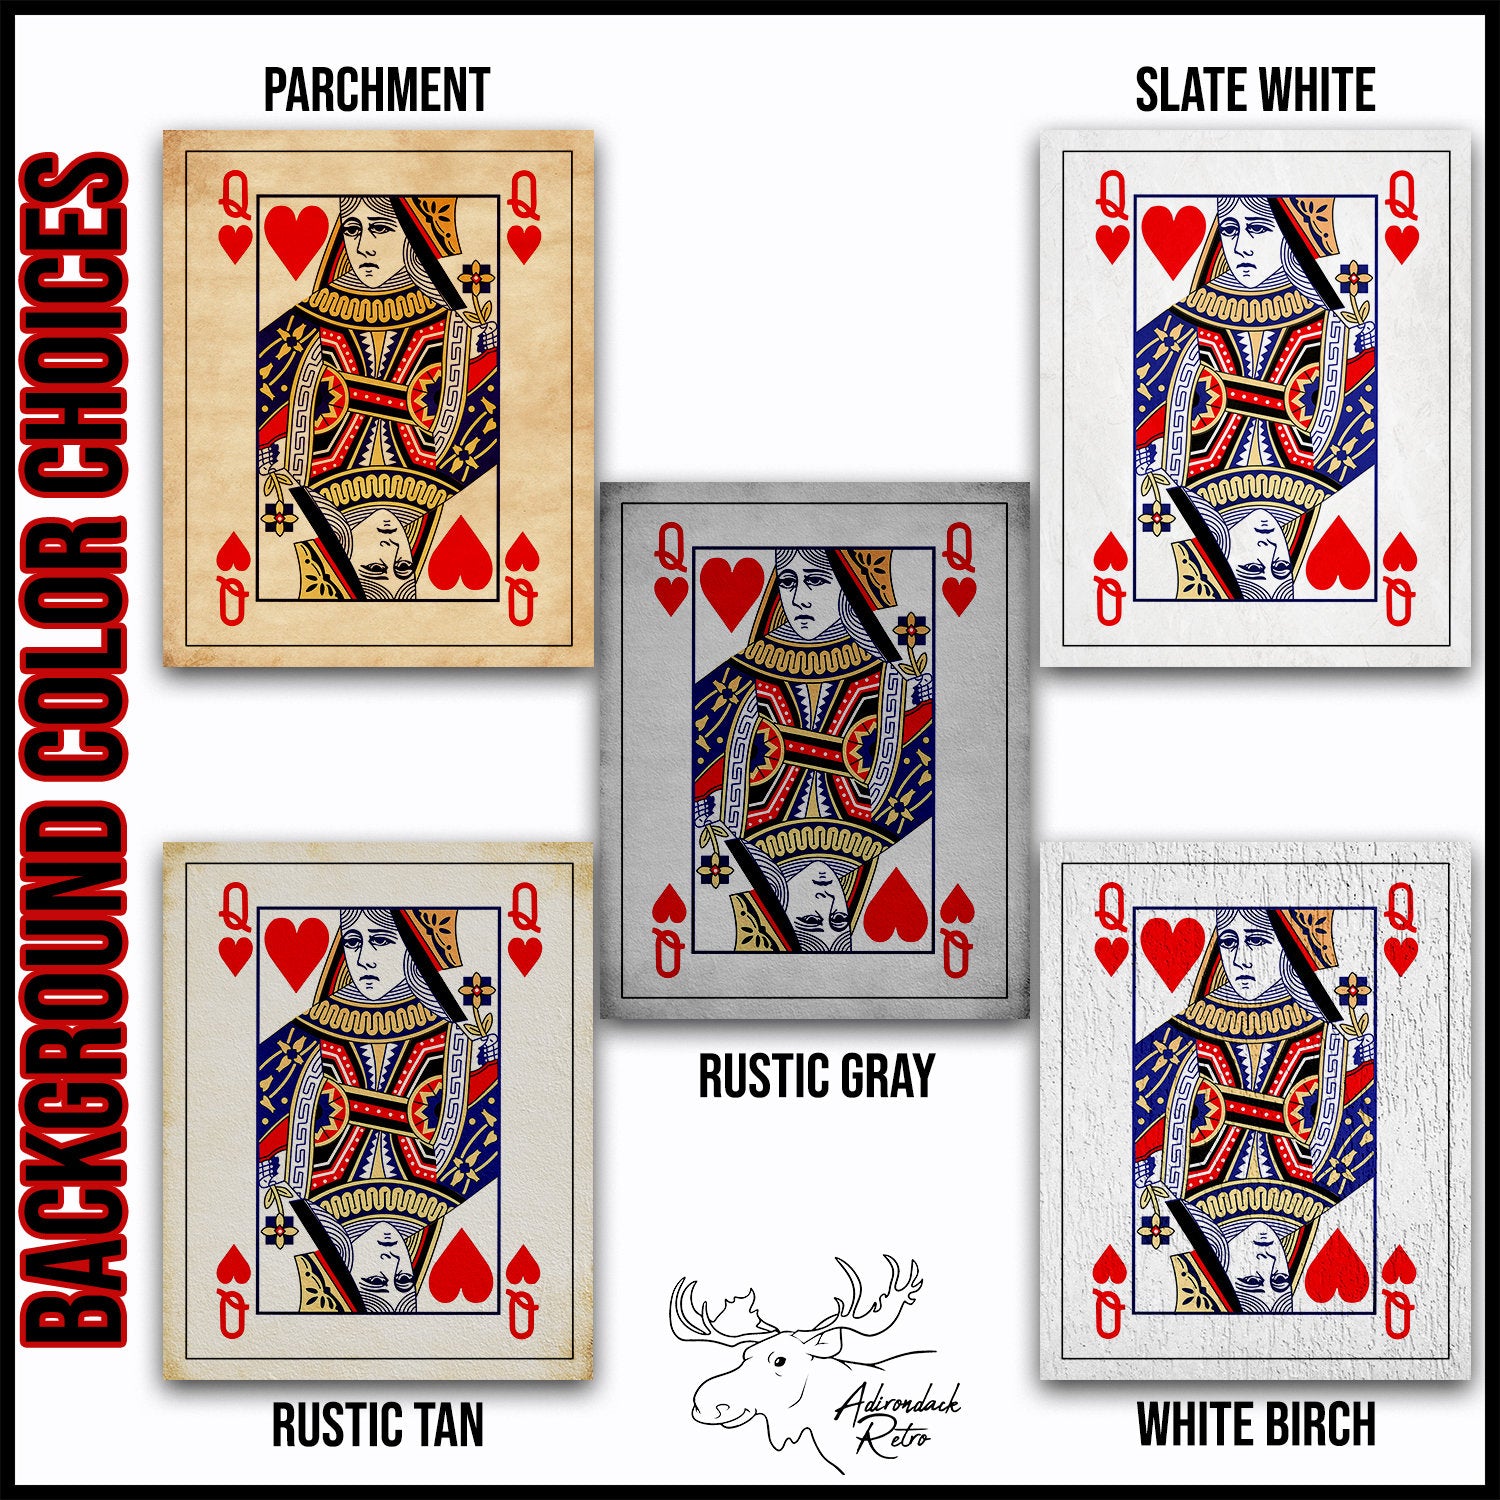 Ace and King of Hearts Playing Card Giclee Fine Art Prints - Big Slick - Black Jack